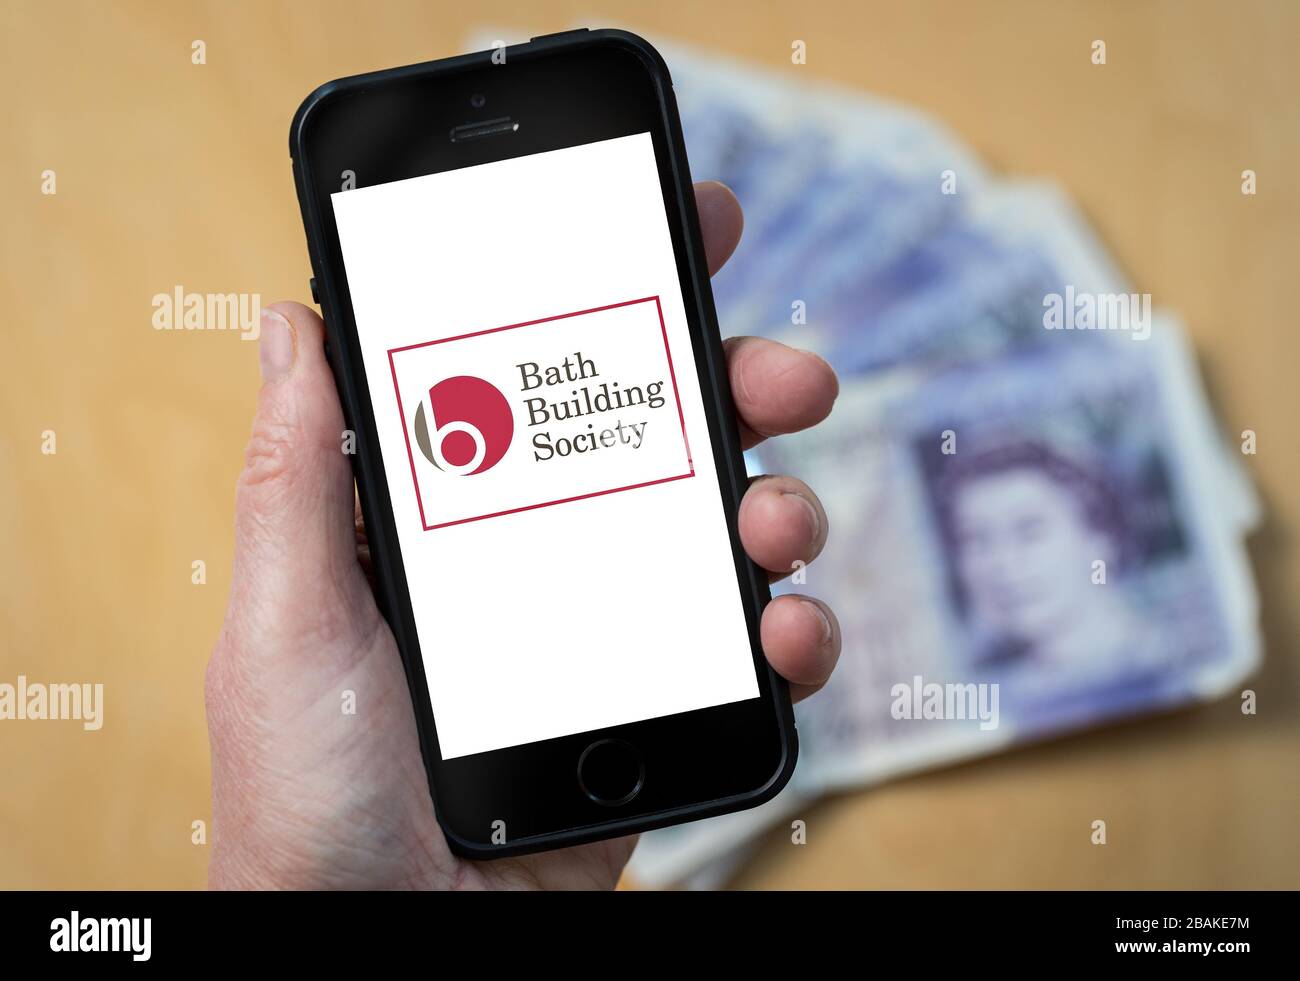 A woman holding a mobile phone showing Bath Building Society (editorial use only) Stock Photo